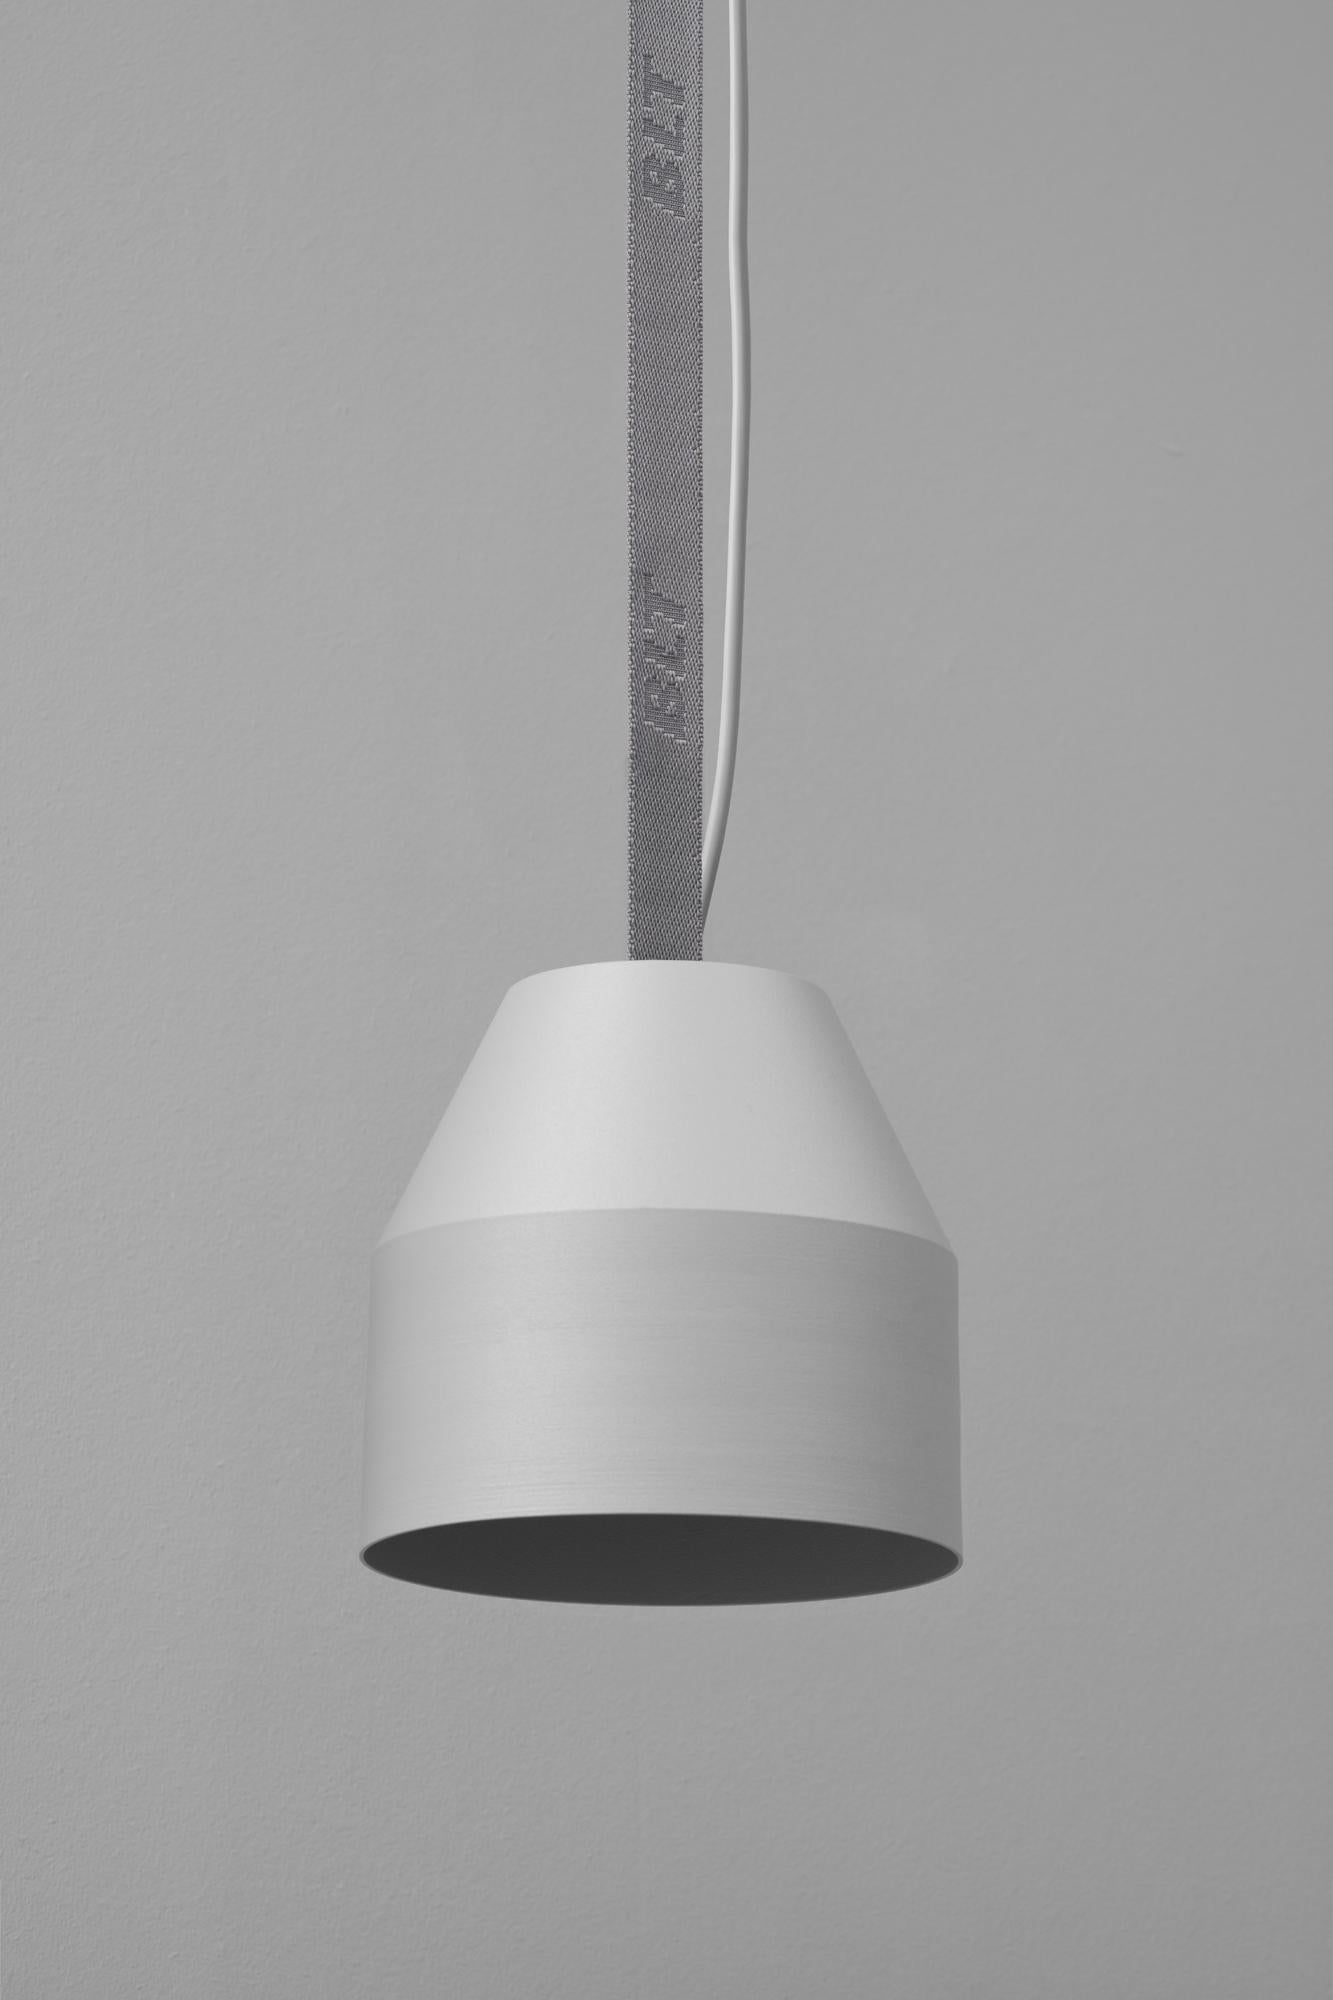 BLT_CAP Big Forest Pendant Lamp by +kouple
Dimensions: Ø 16 x H 16,5 cm. 
Materials: Powder-coated steel and textile.

Available in different color options. The rod length is 250 cm. Please contact us.

All our lamps can be wired according to each